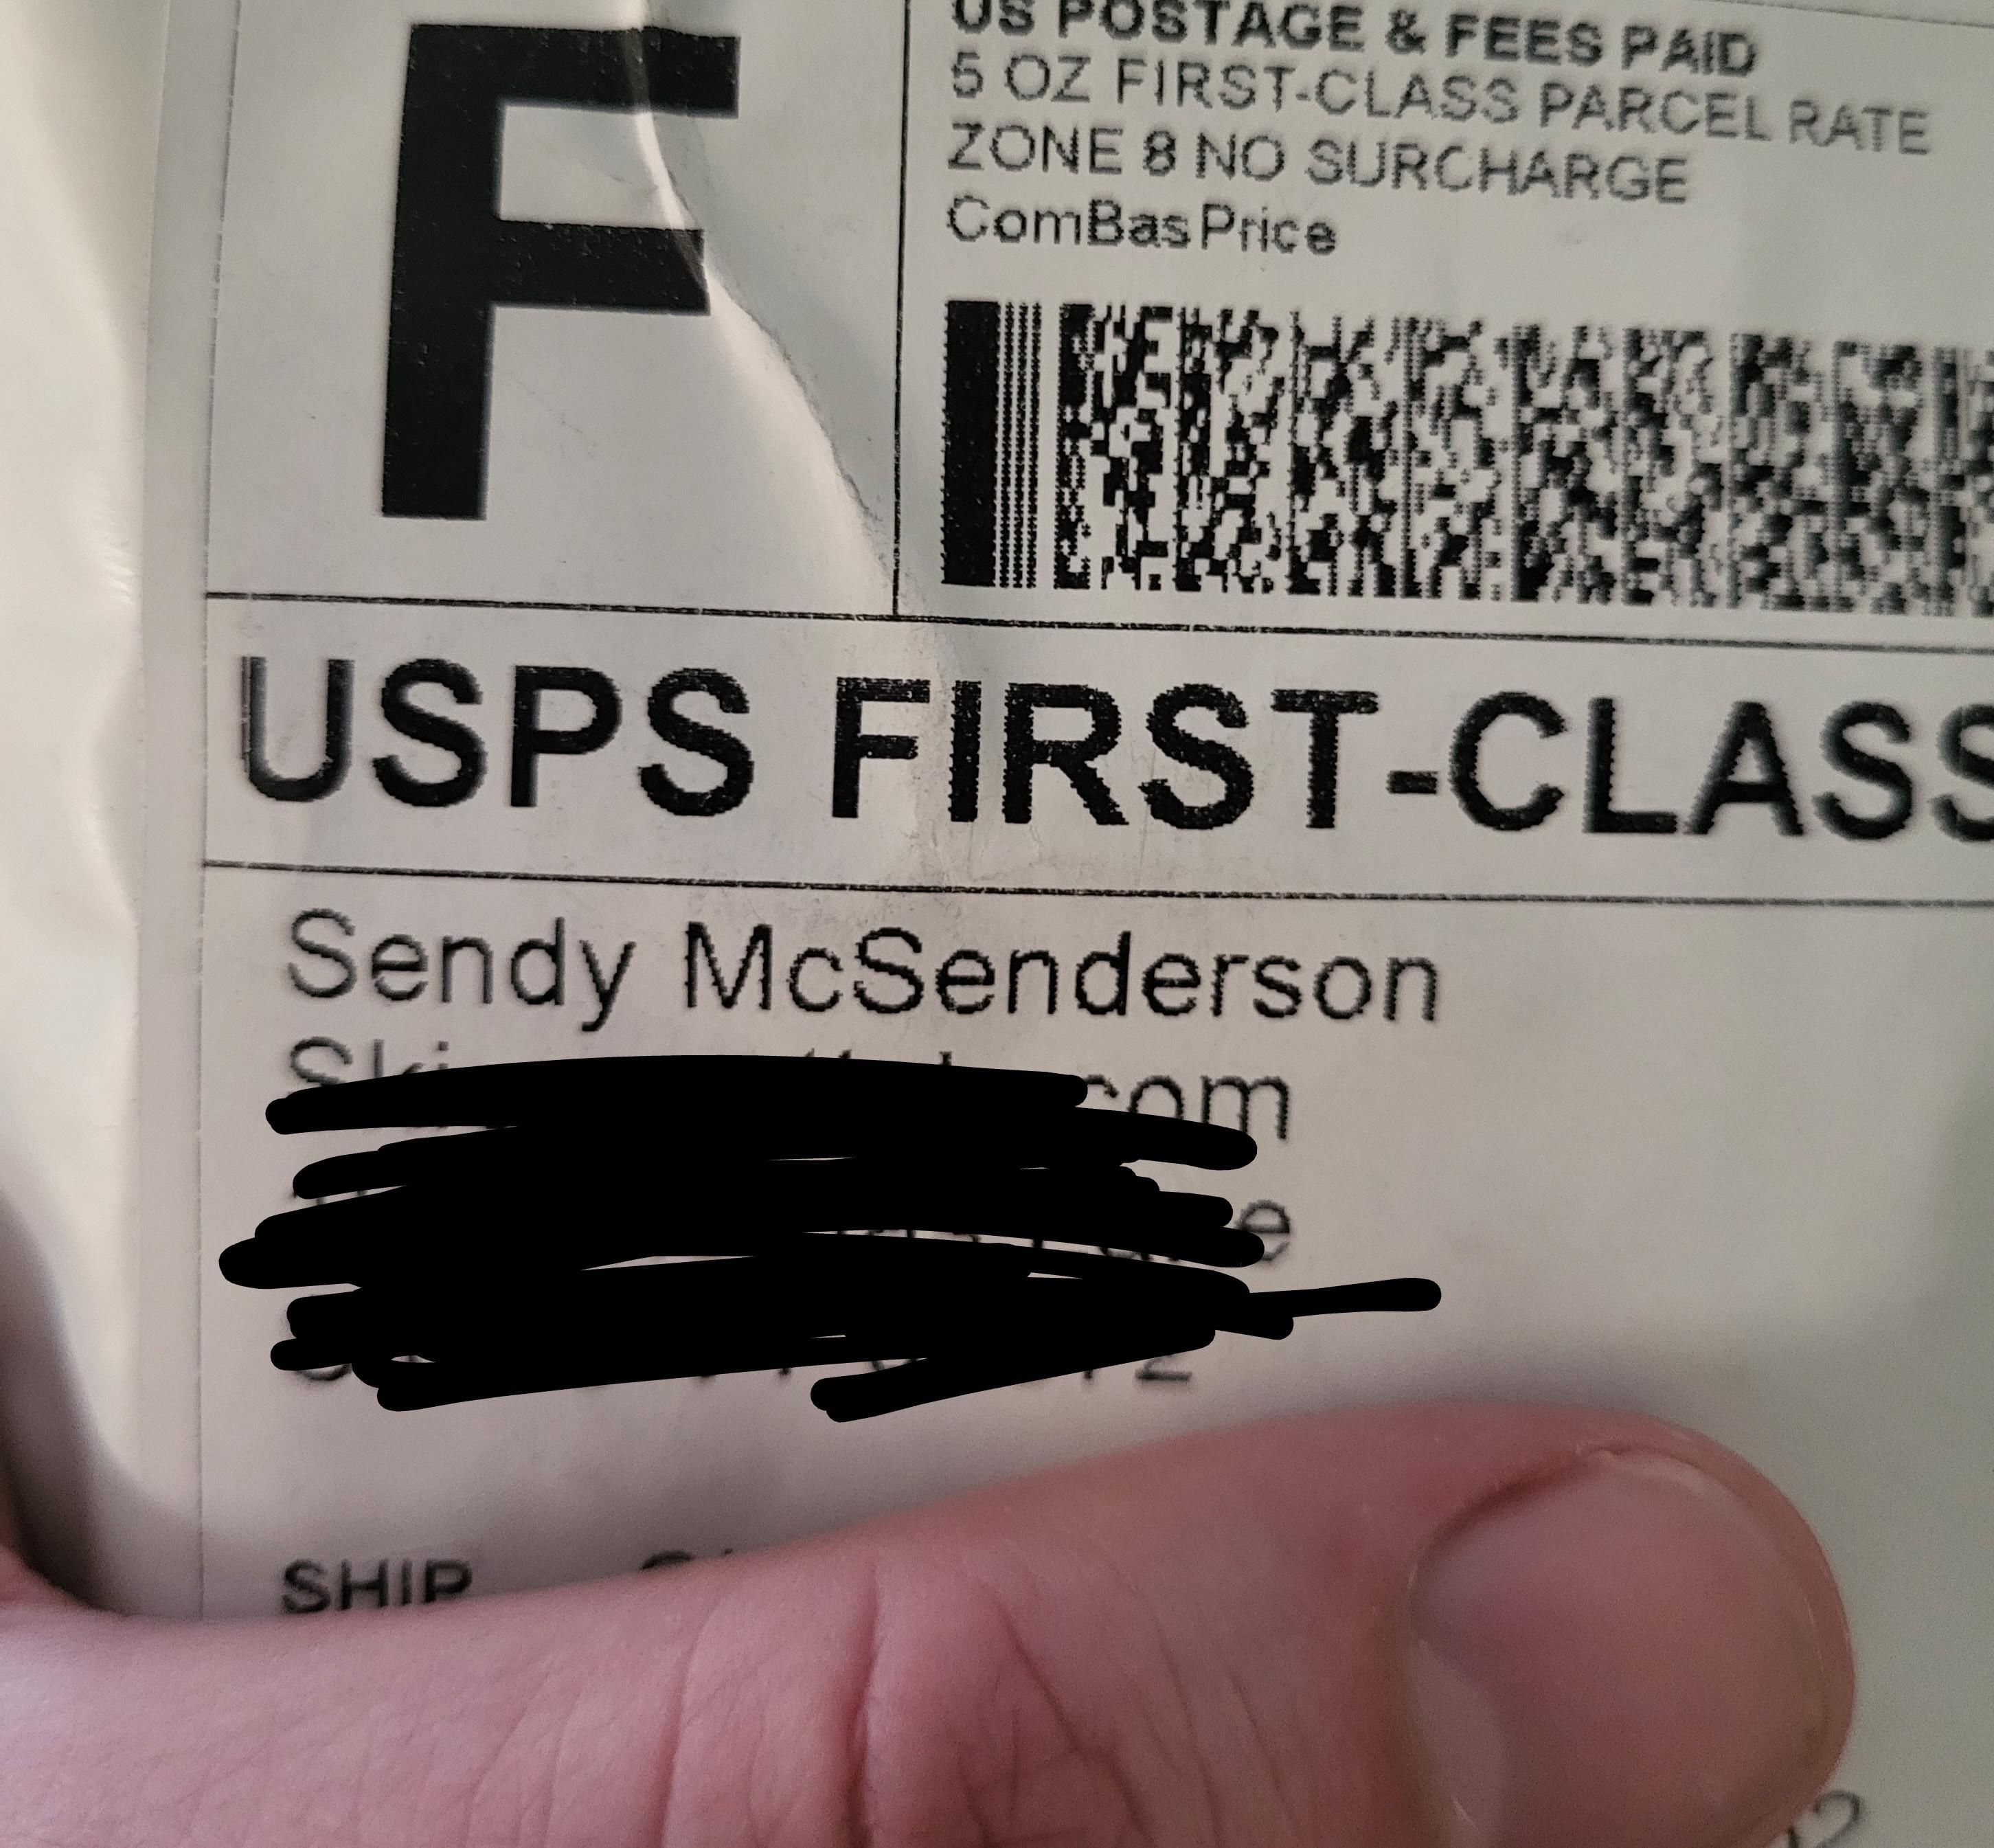 I get the feeling this isn't the sender's real name.